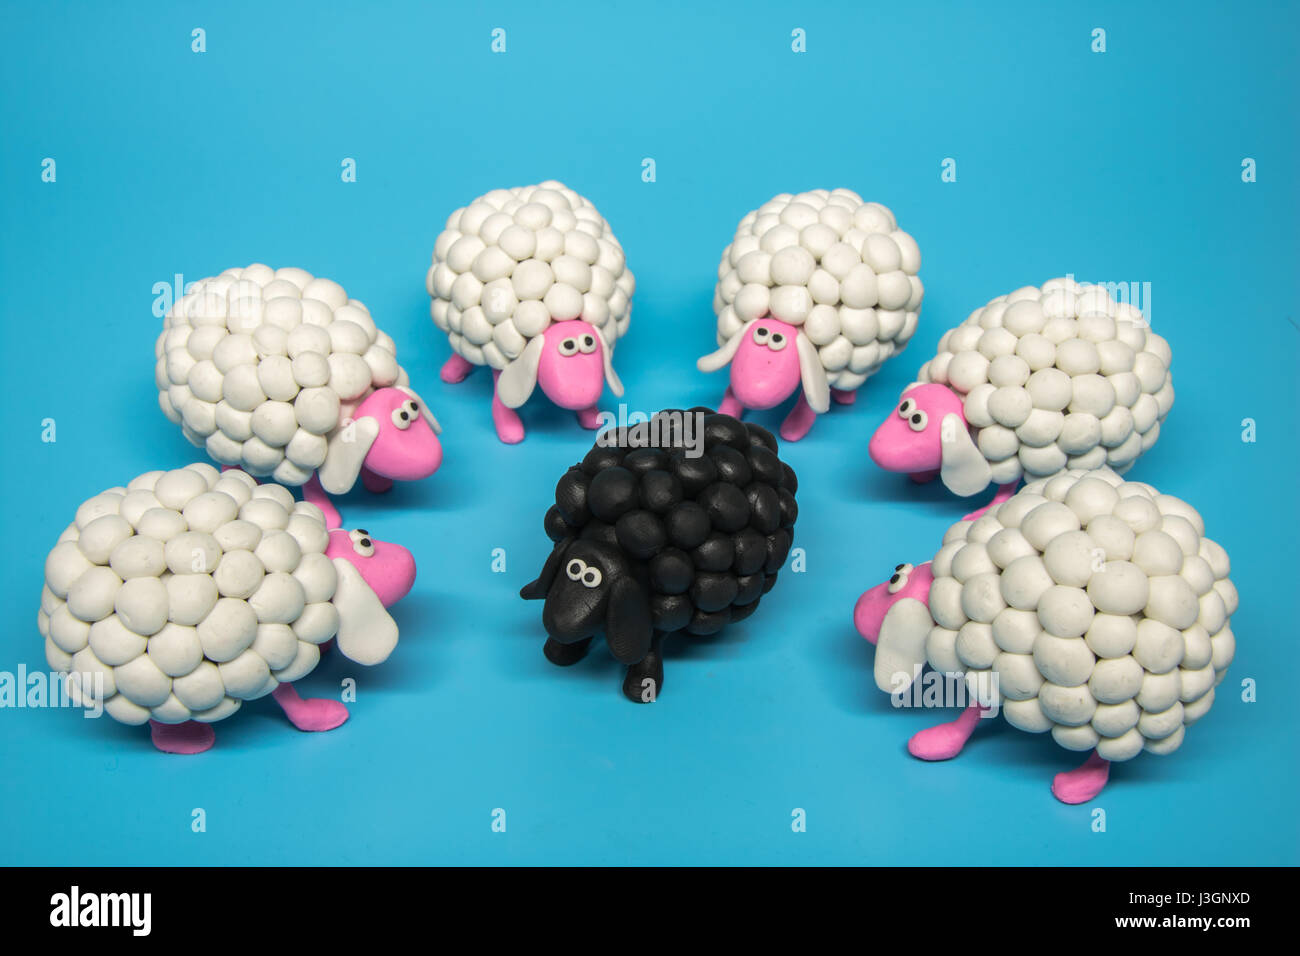 Concept - A circle of white sheep surrounds one black sheep, on a solid blue background. Stock Photo